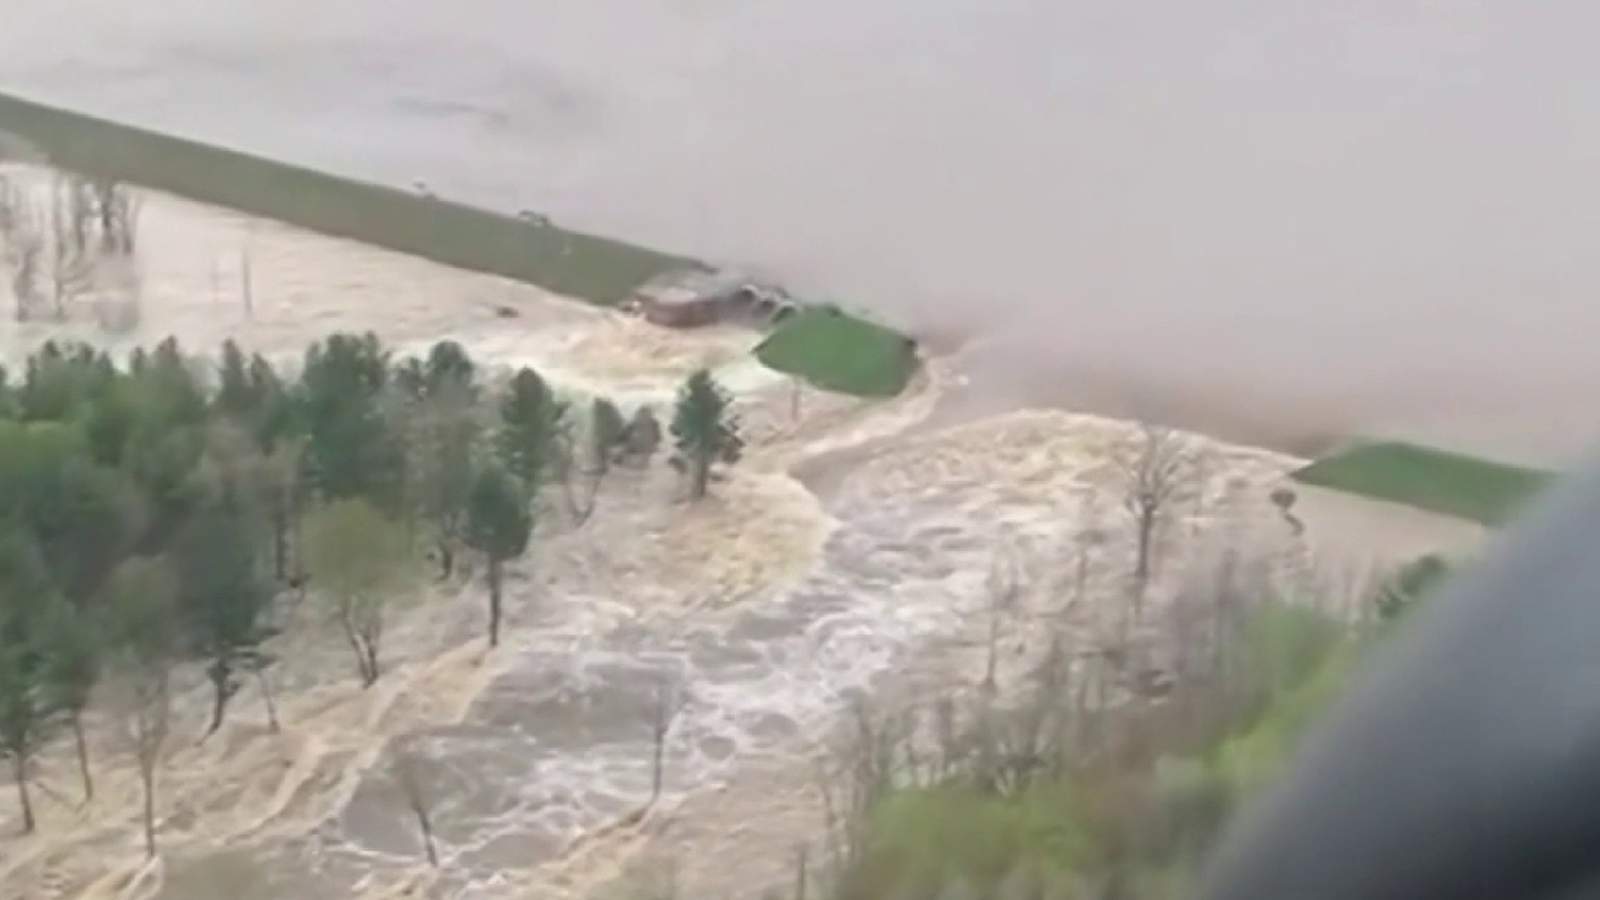 Investigating who is responsible for Edenville Dam failure that led to devastating floods